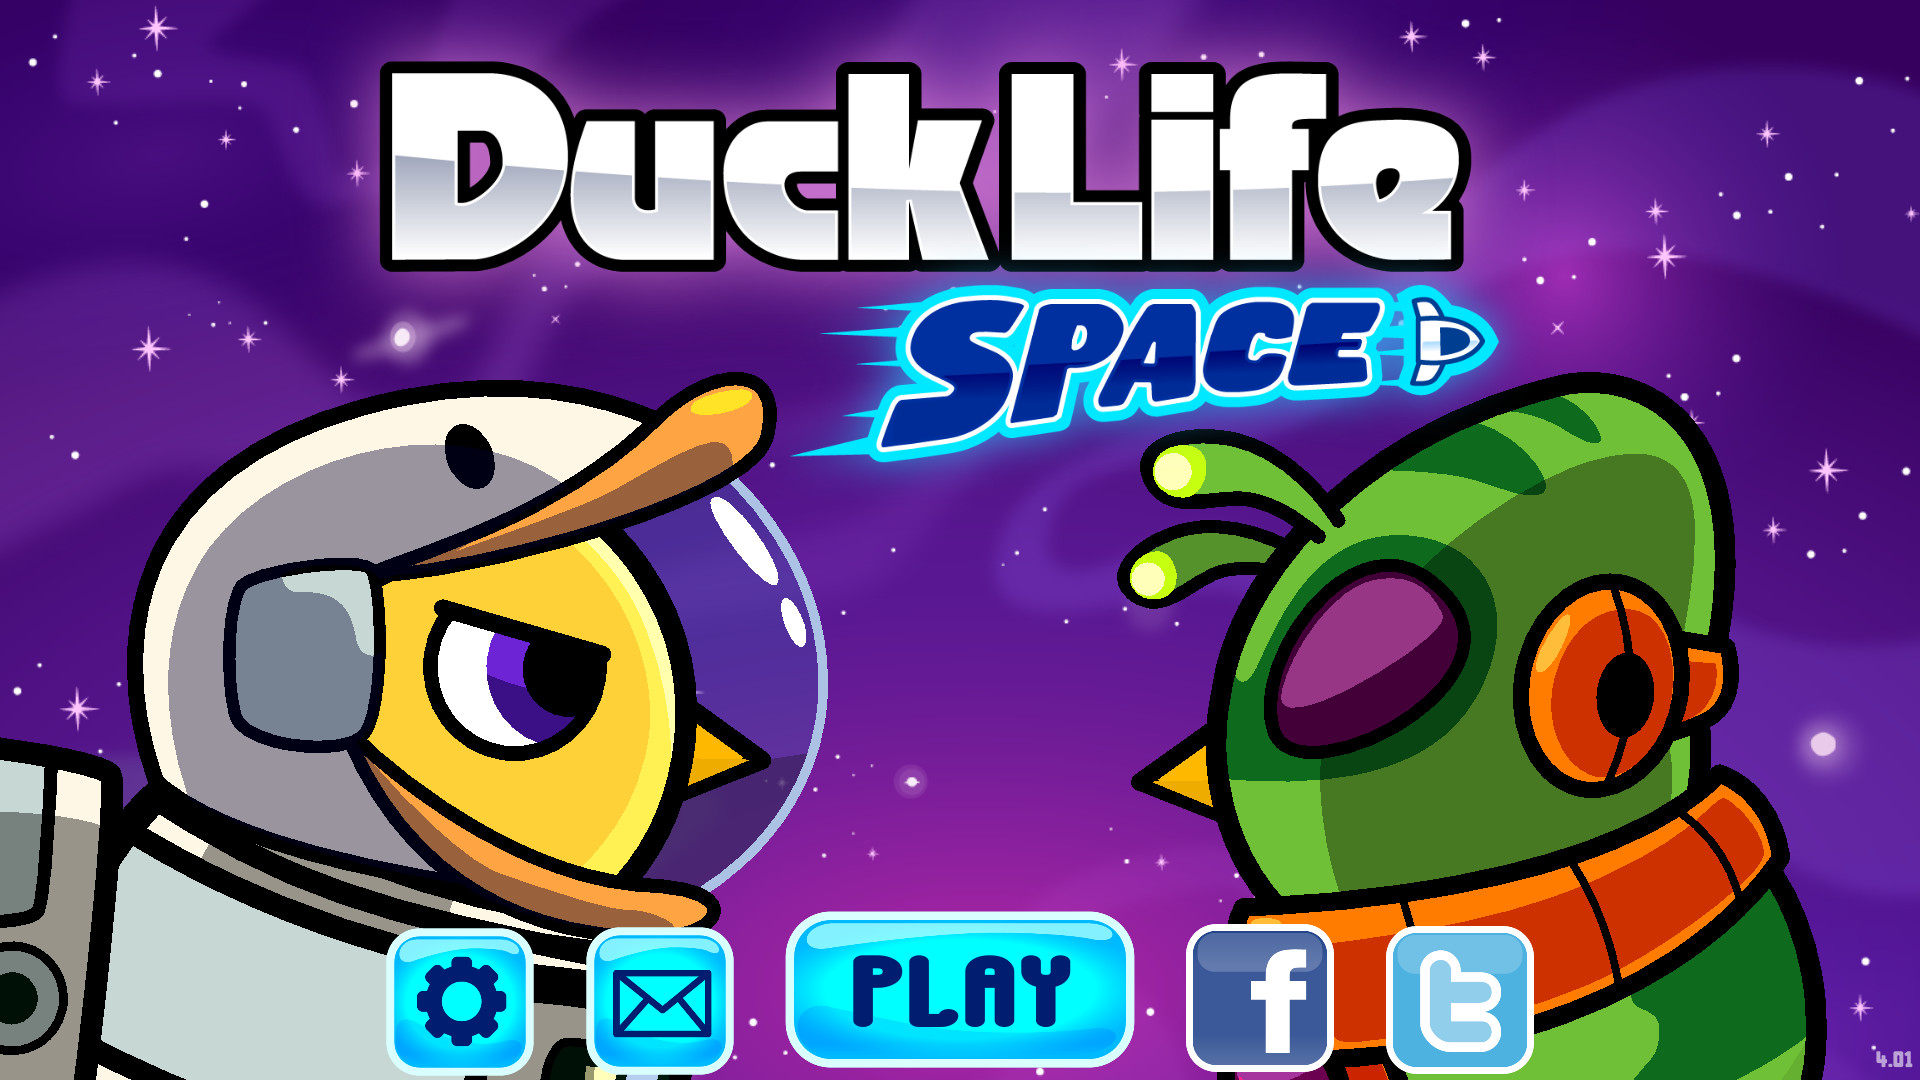 Duck Life 4 - Free Play & No Download